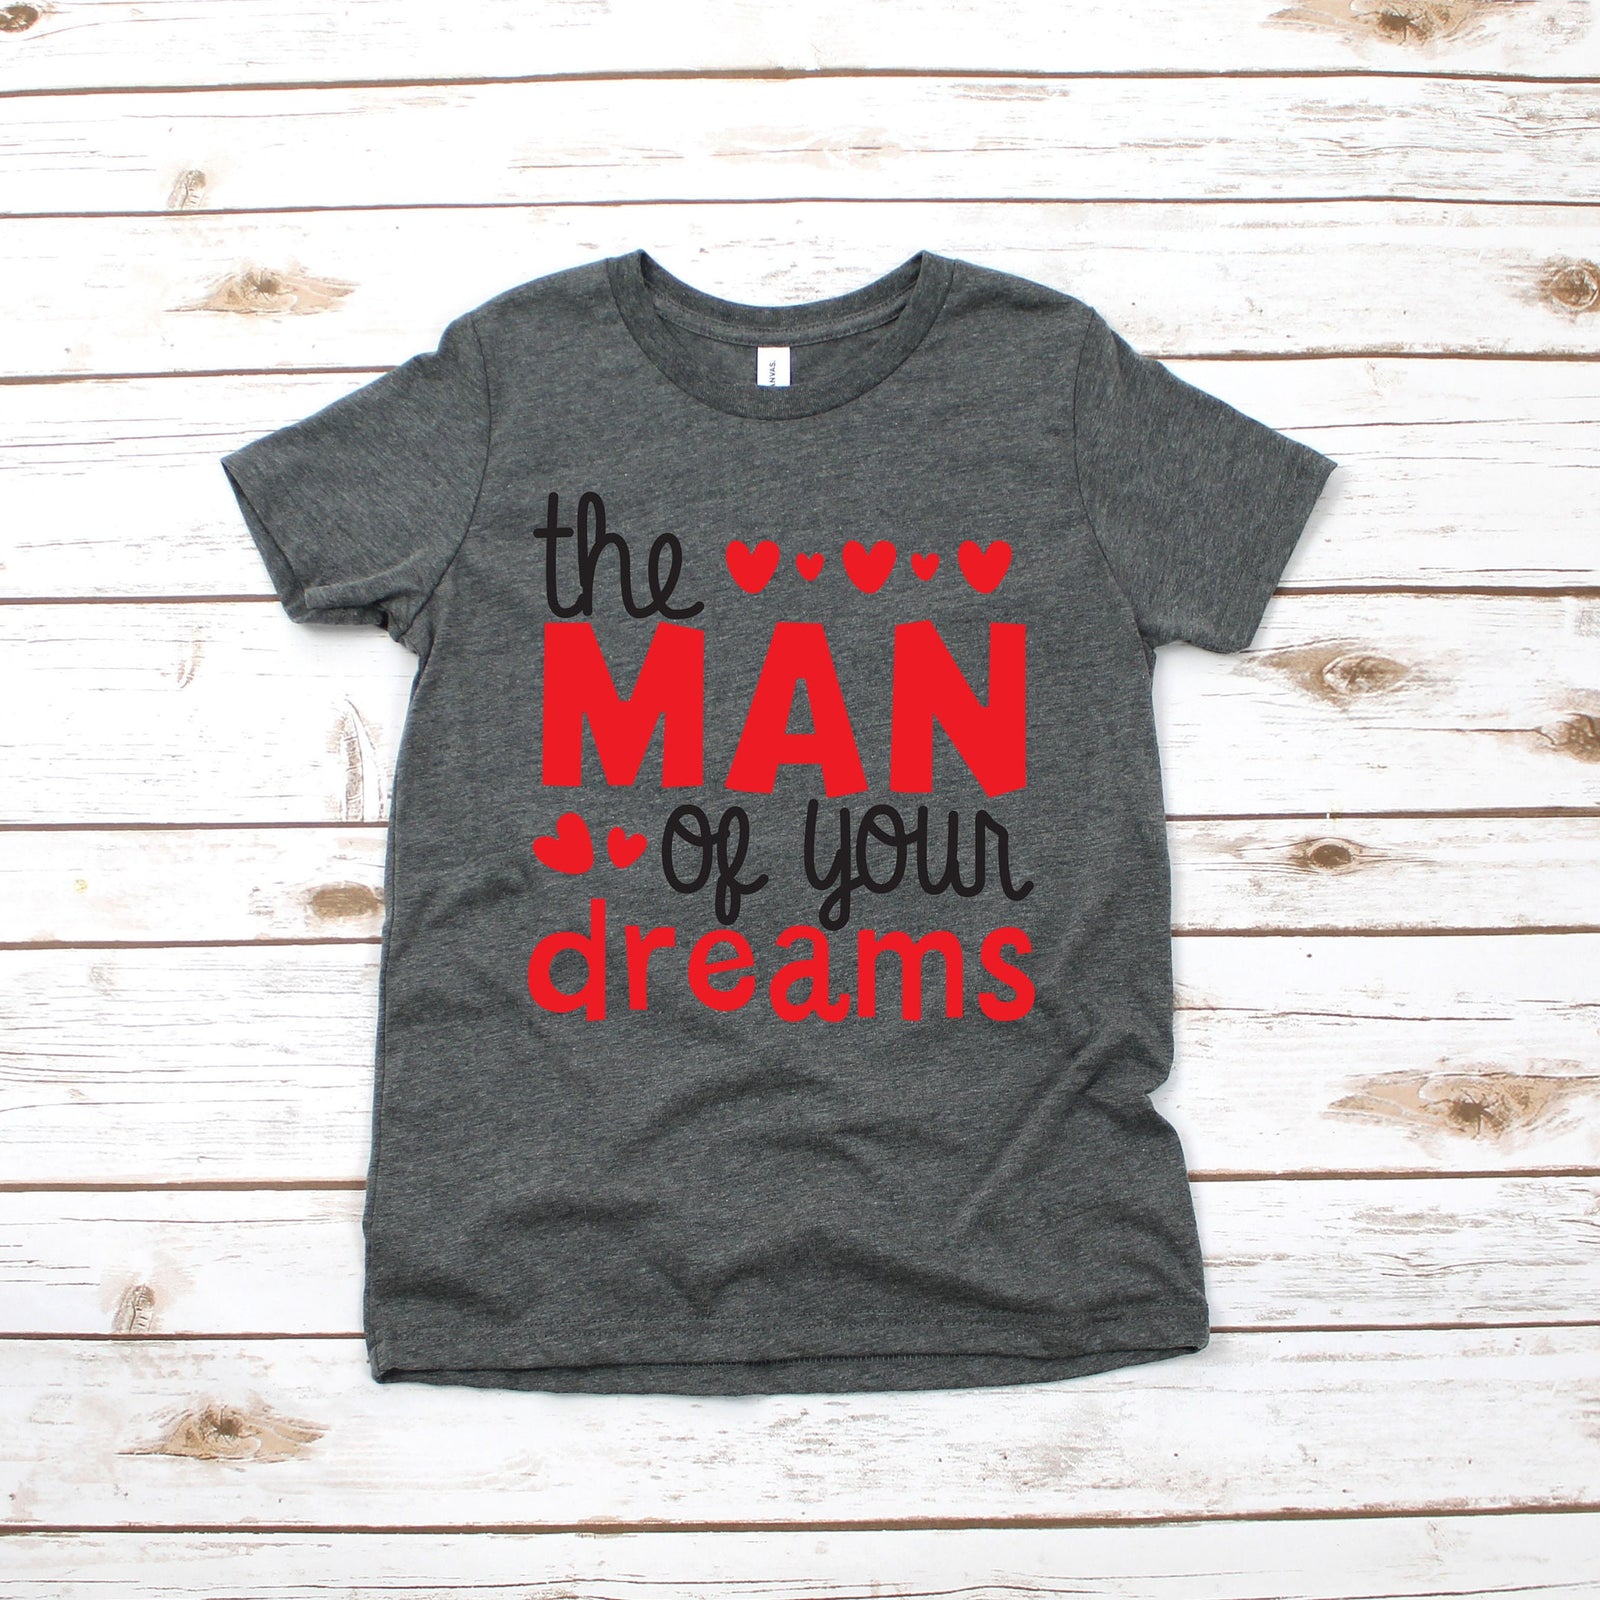 Man of your Dreams - Infant Toddler Youth Valentine's Day Shirt - Funny - Love Shirt for Kids